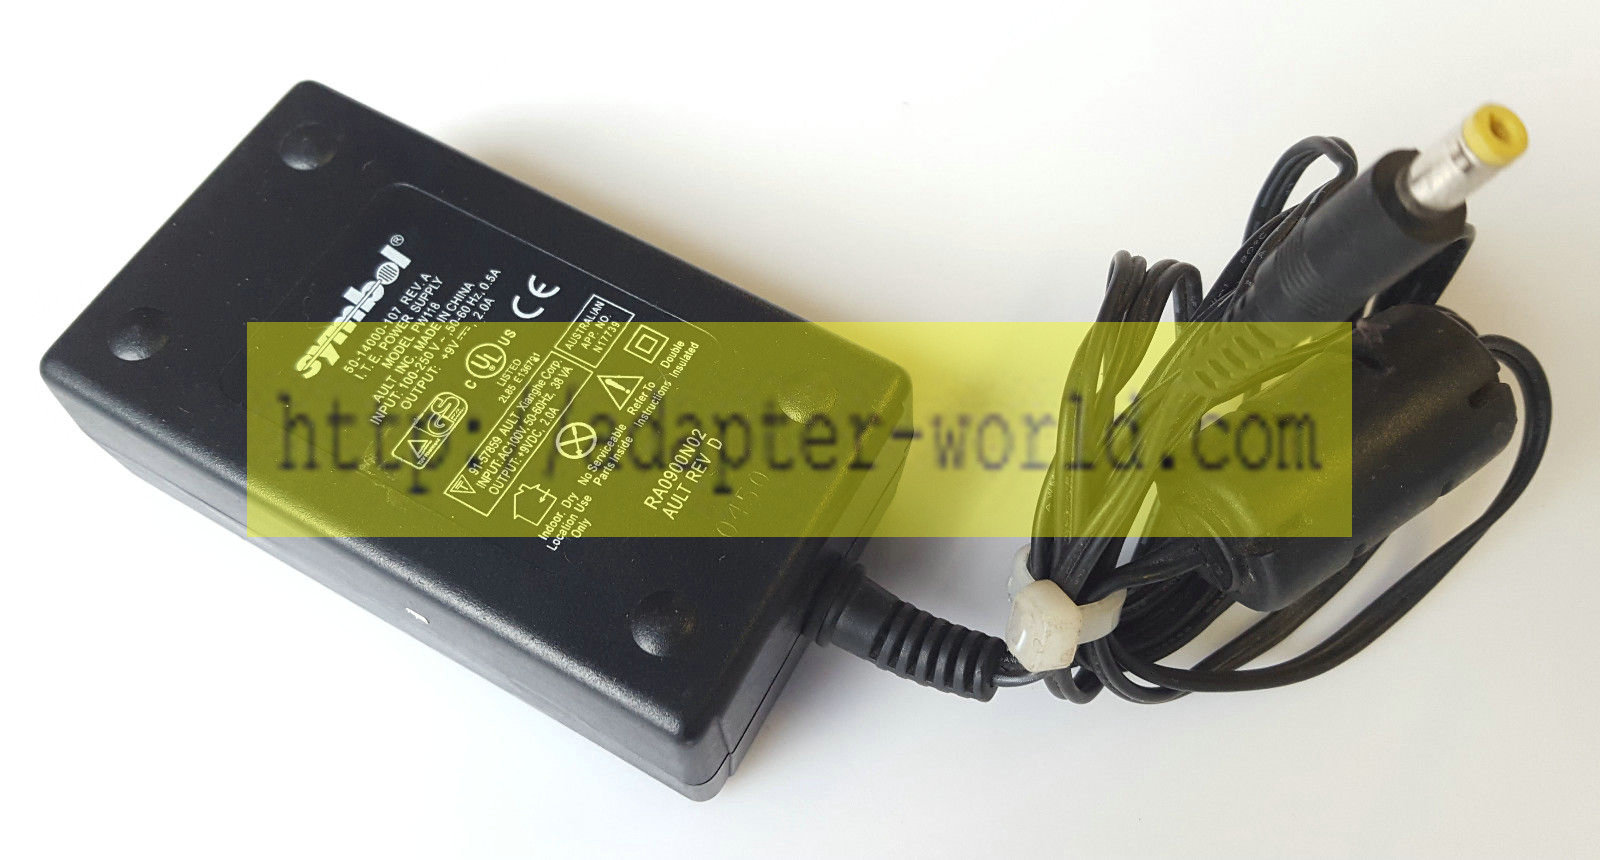 *Brand NEW*SYMBOL PW118 9V 2.0A AC/DC ADAPTER POWER SUPPLY 50-14000-107